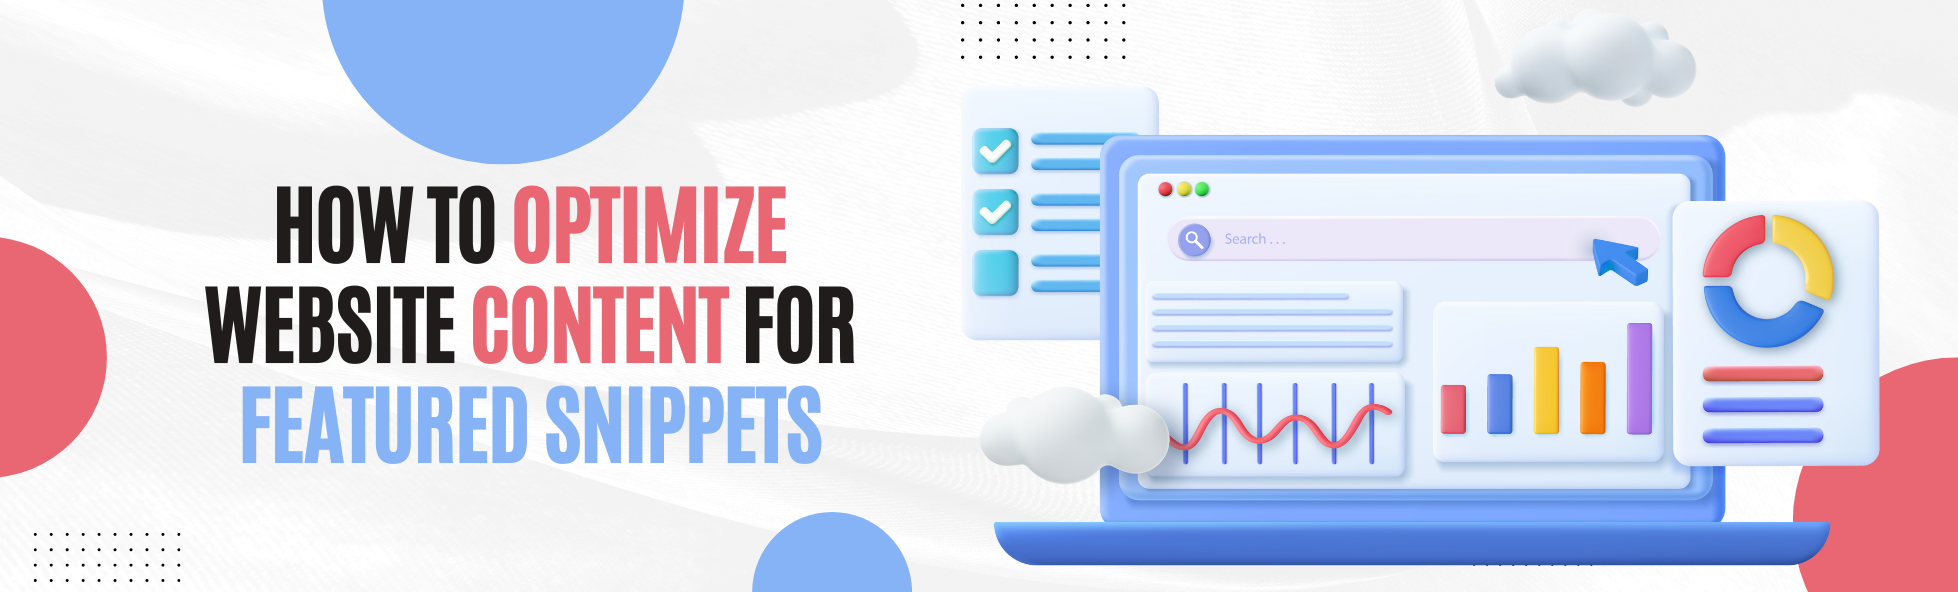 How to Optimize Website Content for Featured Snippets